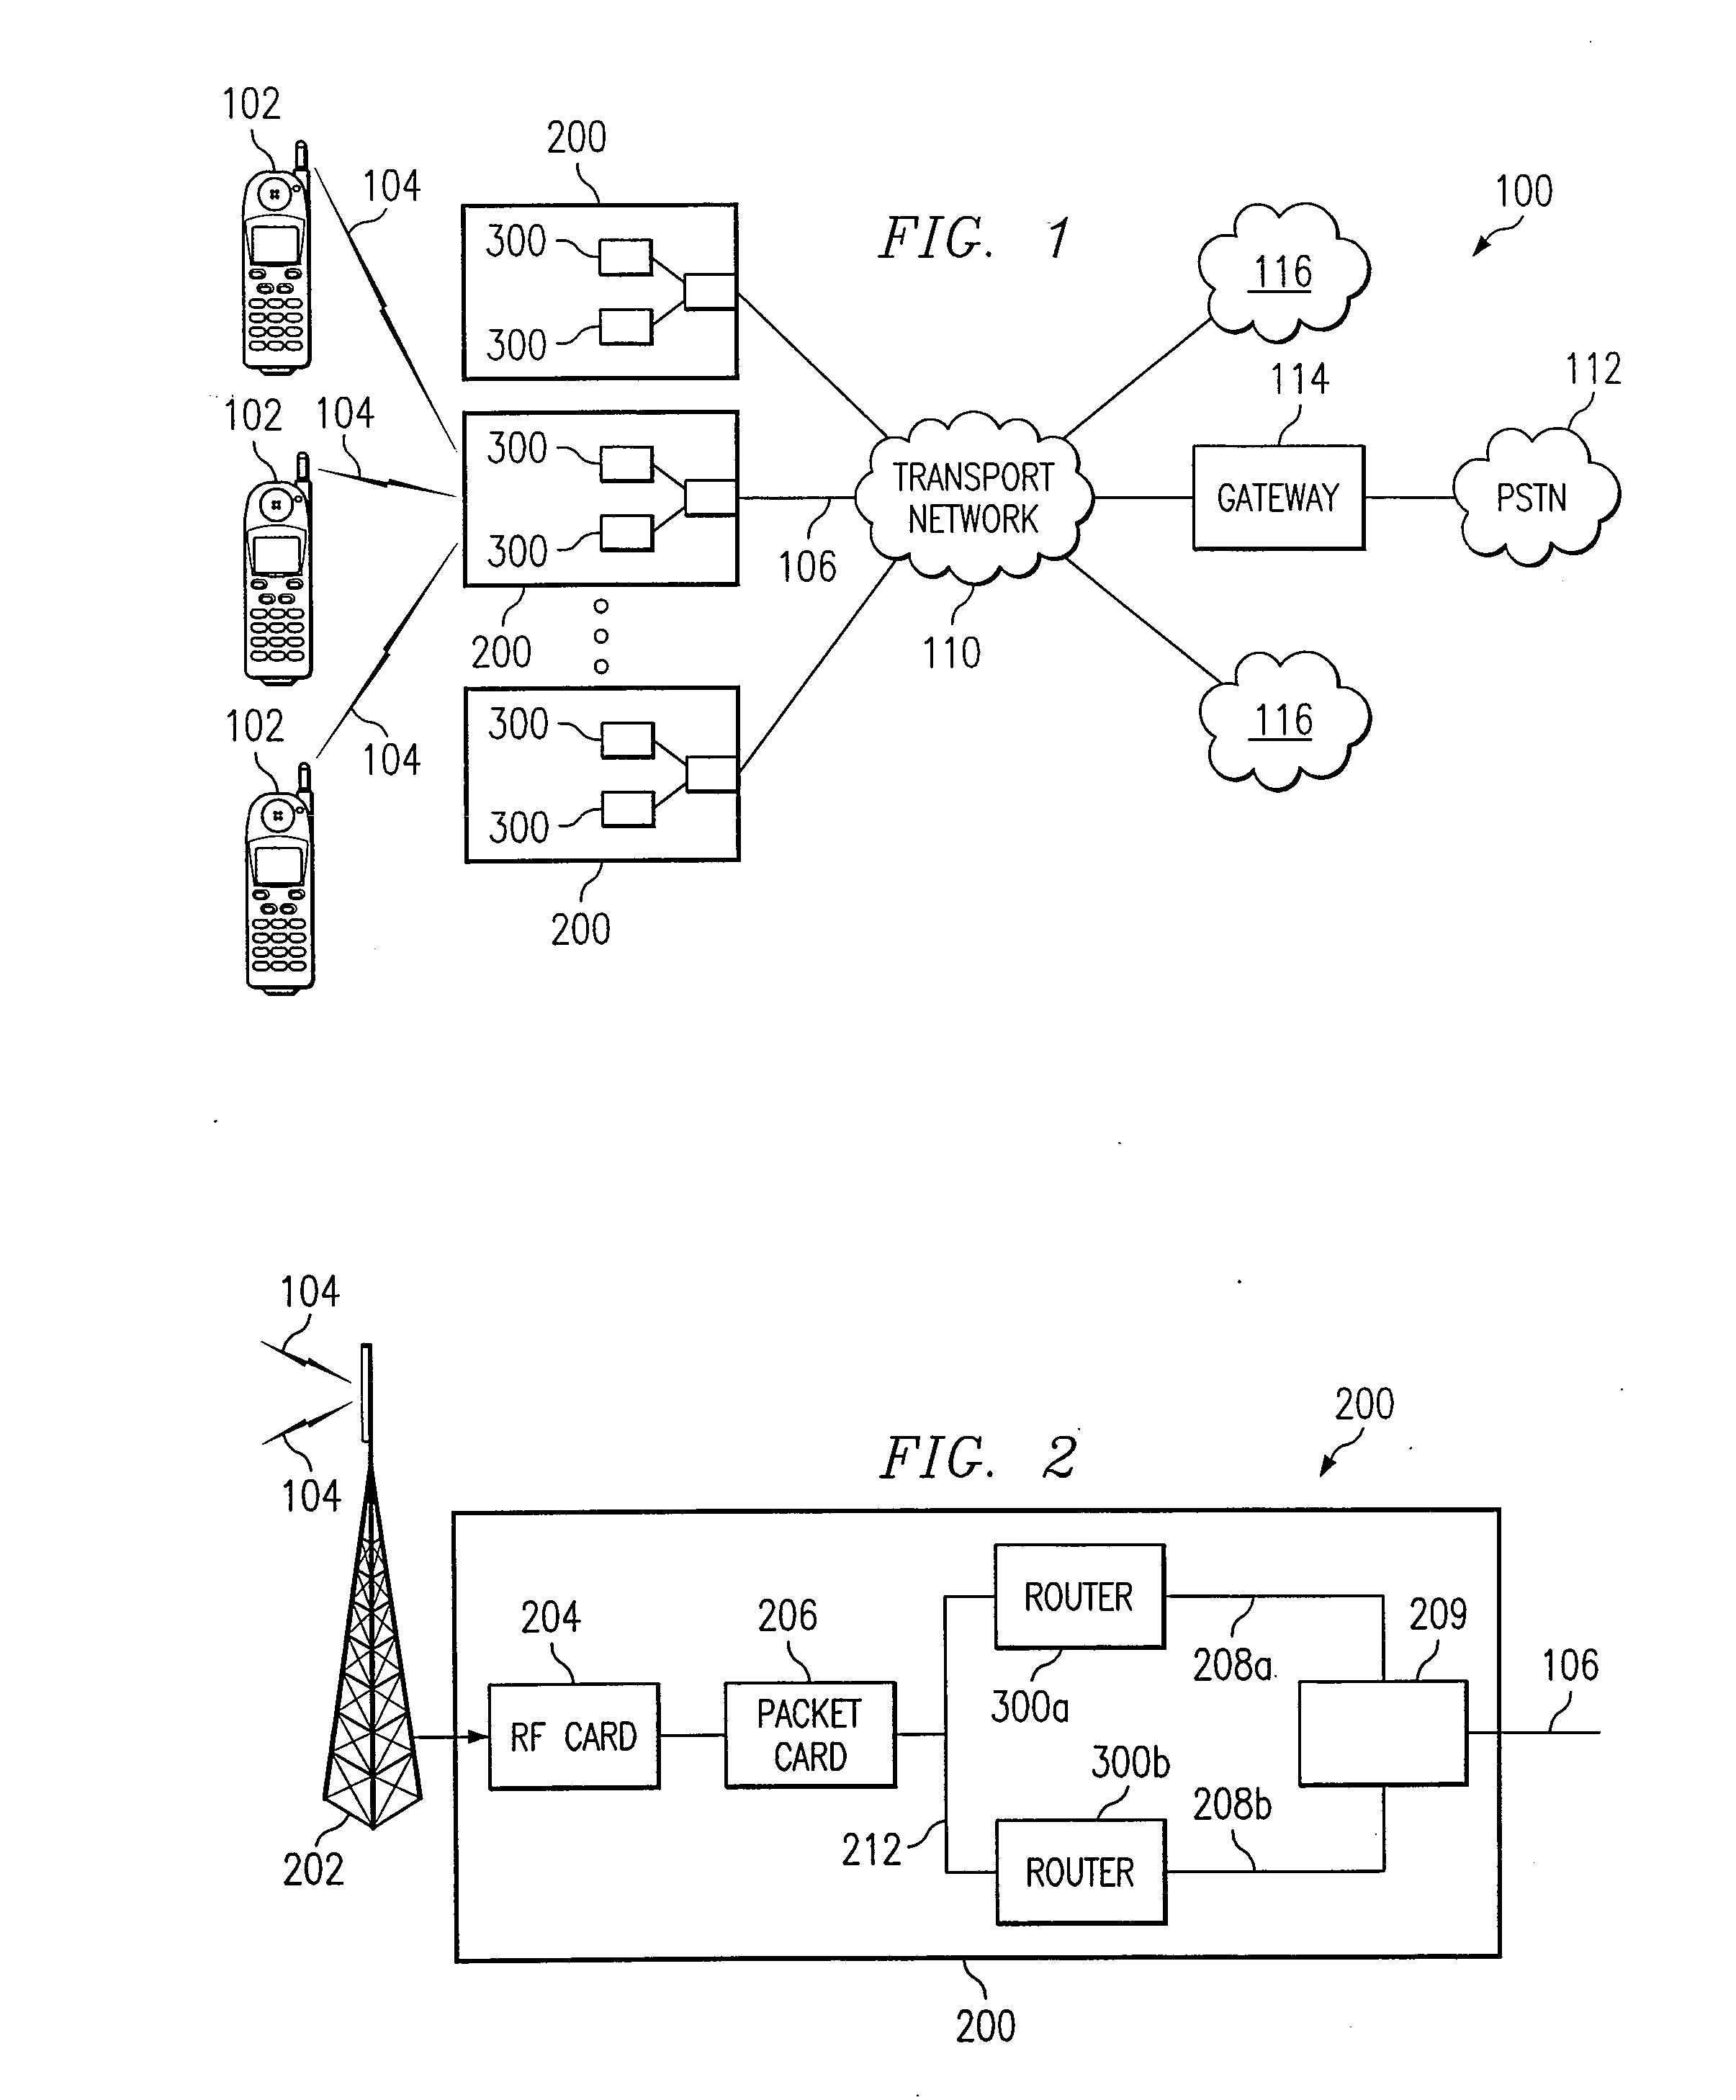 Method and System for Router Redundancy in a Wide Area Network